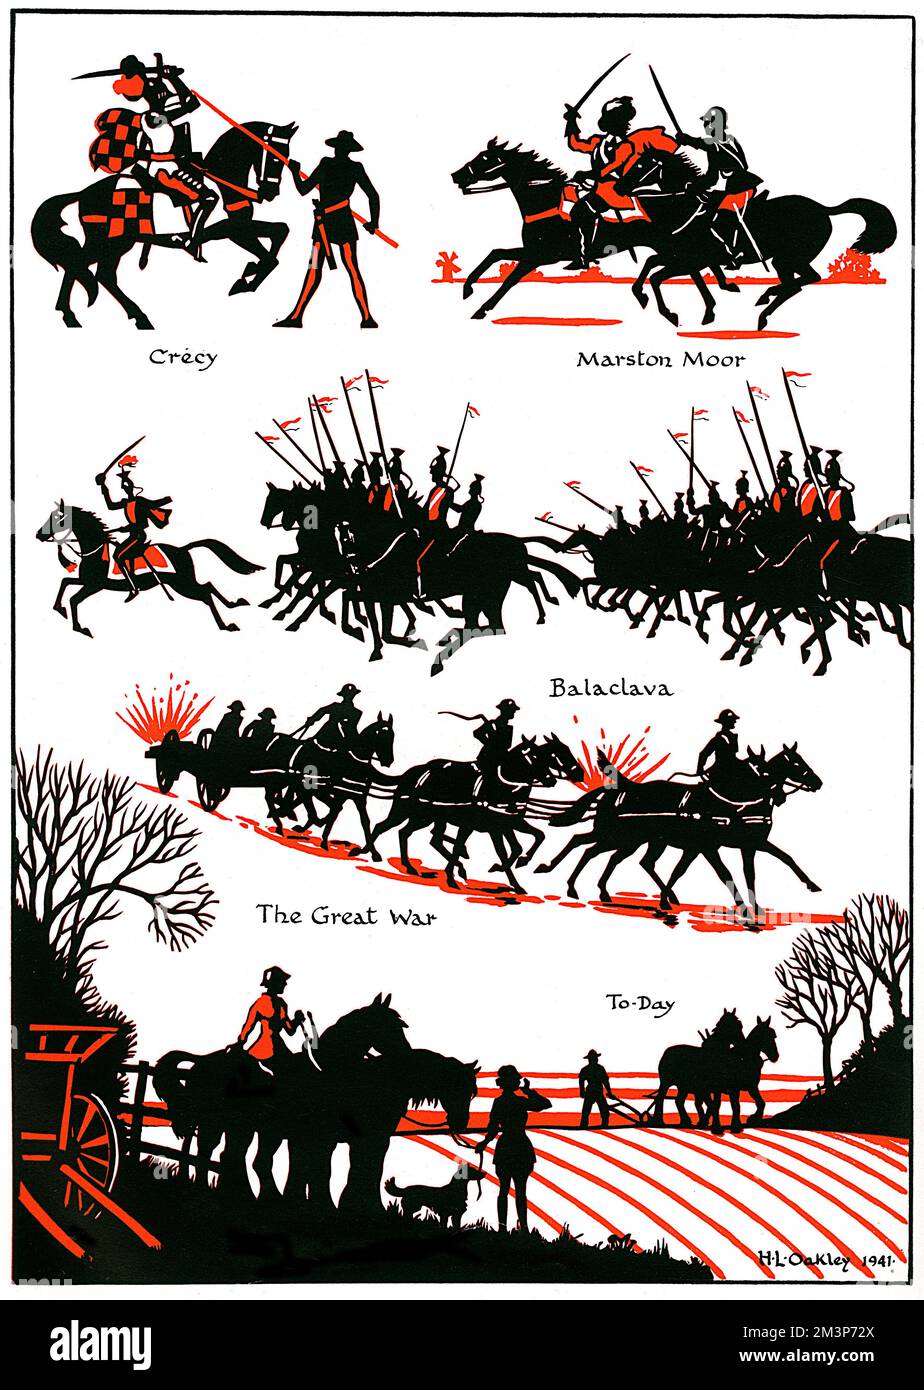 Views of the horse through history in silhouette by Captain Harry Lawrence Oakley including a knight on horseback at the Battle of Crecy, Roundheads and Cavaliers fighting it out at the Battle of Marston Moor, the Battle of Balaclava, horses used in the First World War and a more tranquil and bucolic purpose for the horse - on a farm, ploughing furrows.     Date: 1941 Stock Photo